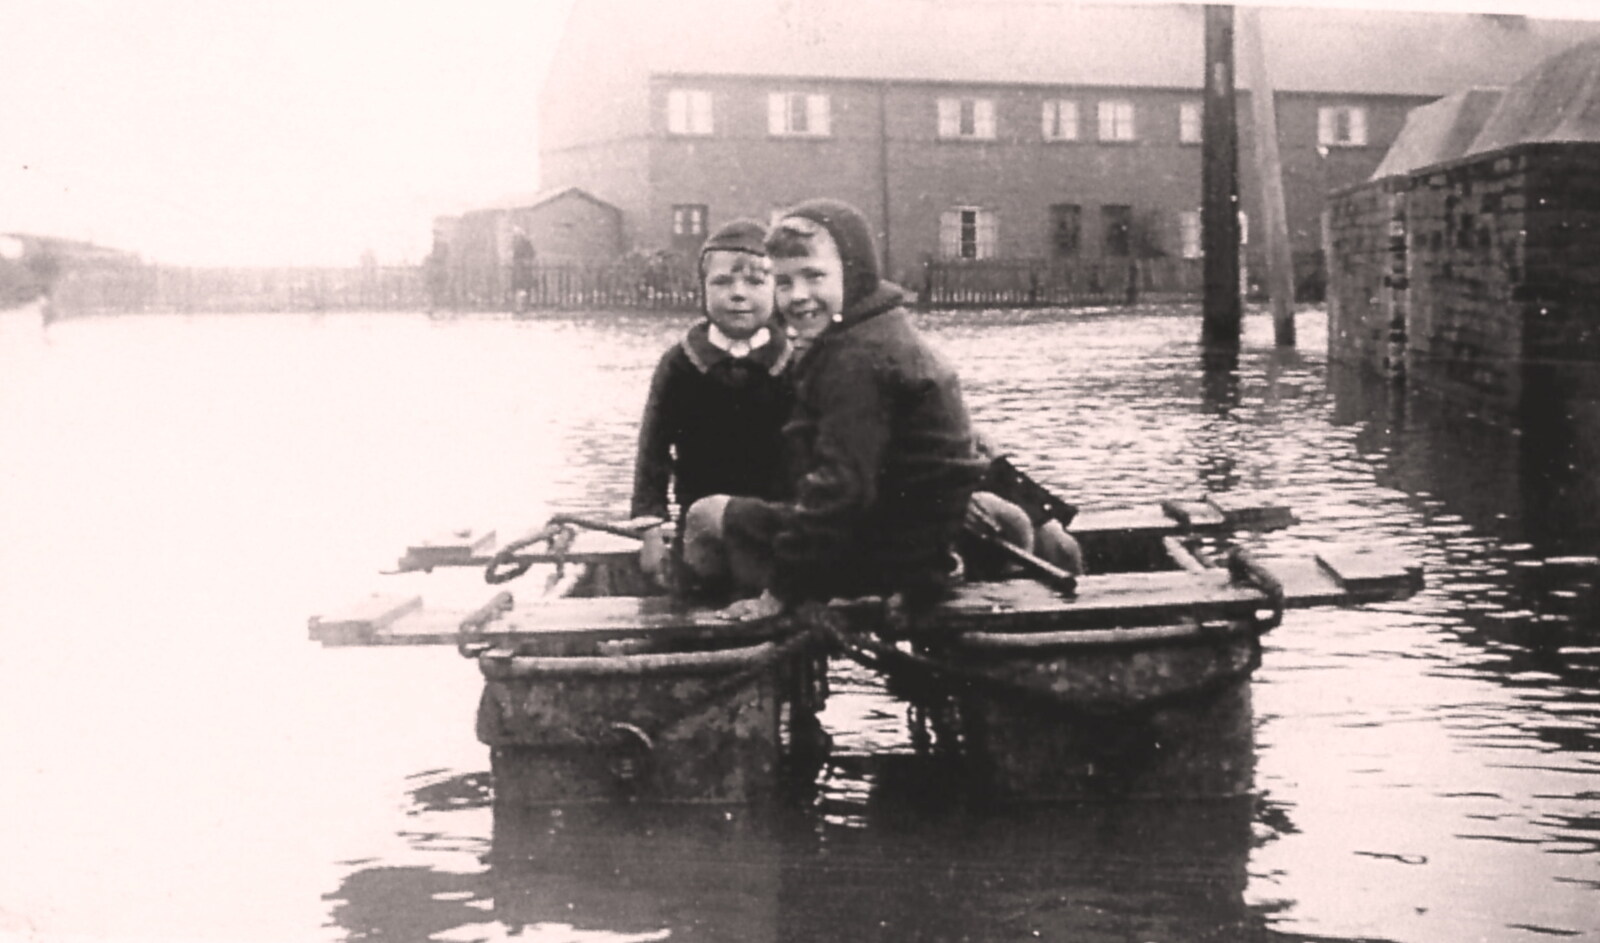 The Grandad Archive, Various Locations - 7th January 2023: The floods of Church Fenton, 1950?